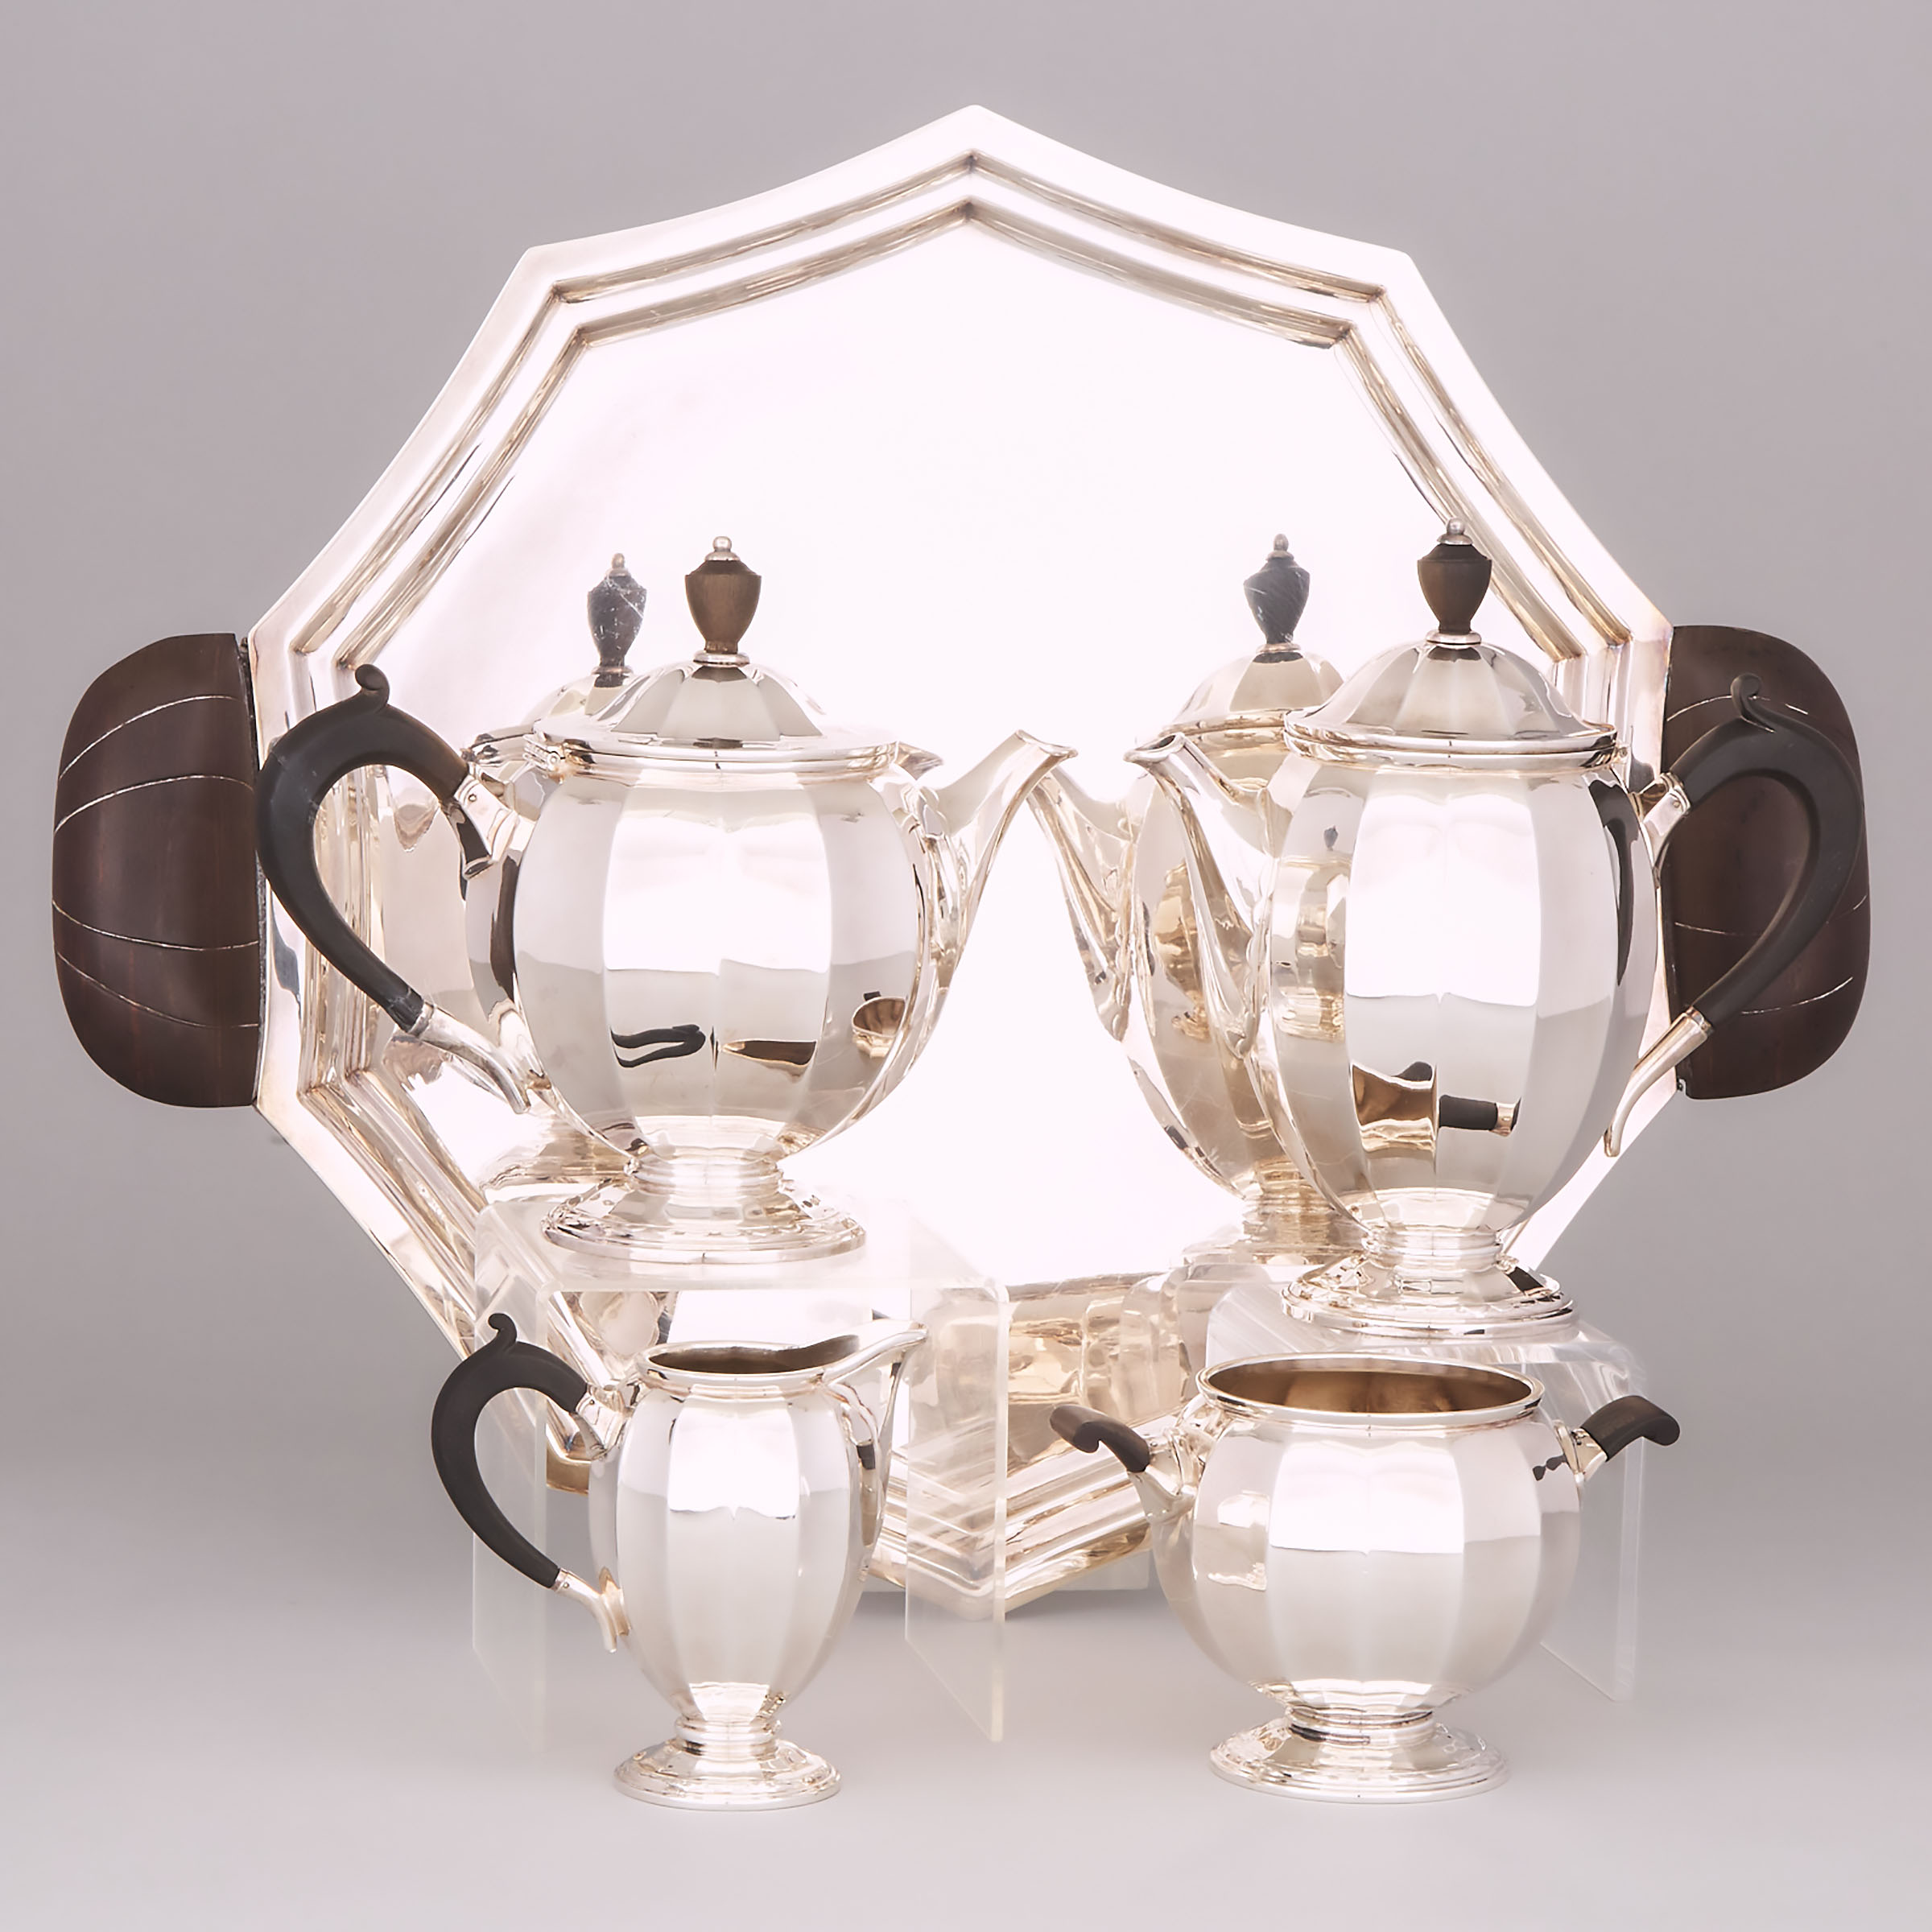 French Silver Plated Tea and Coffee Service, Christofle, 20th century